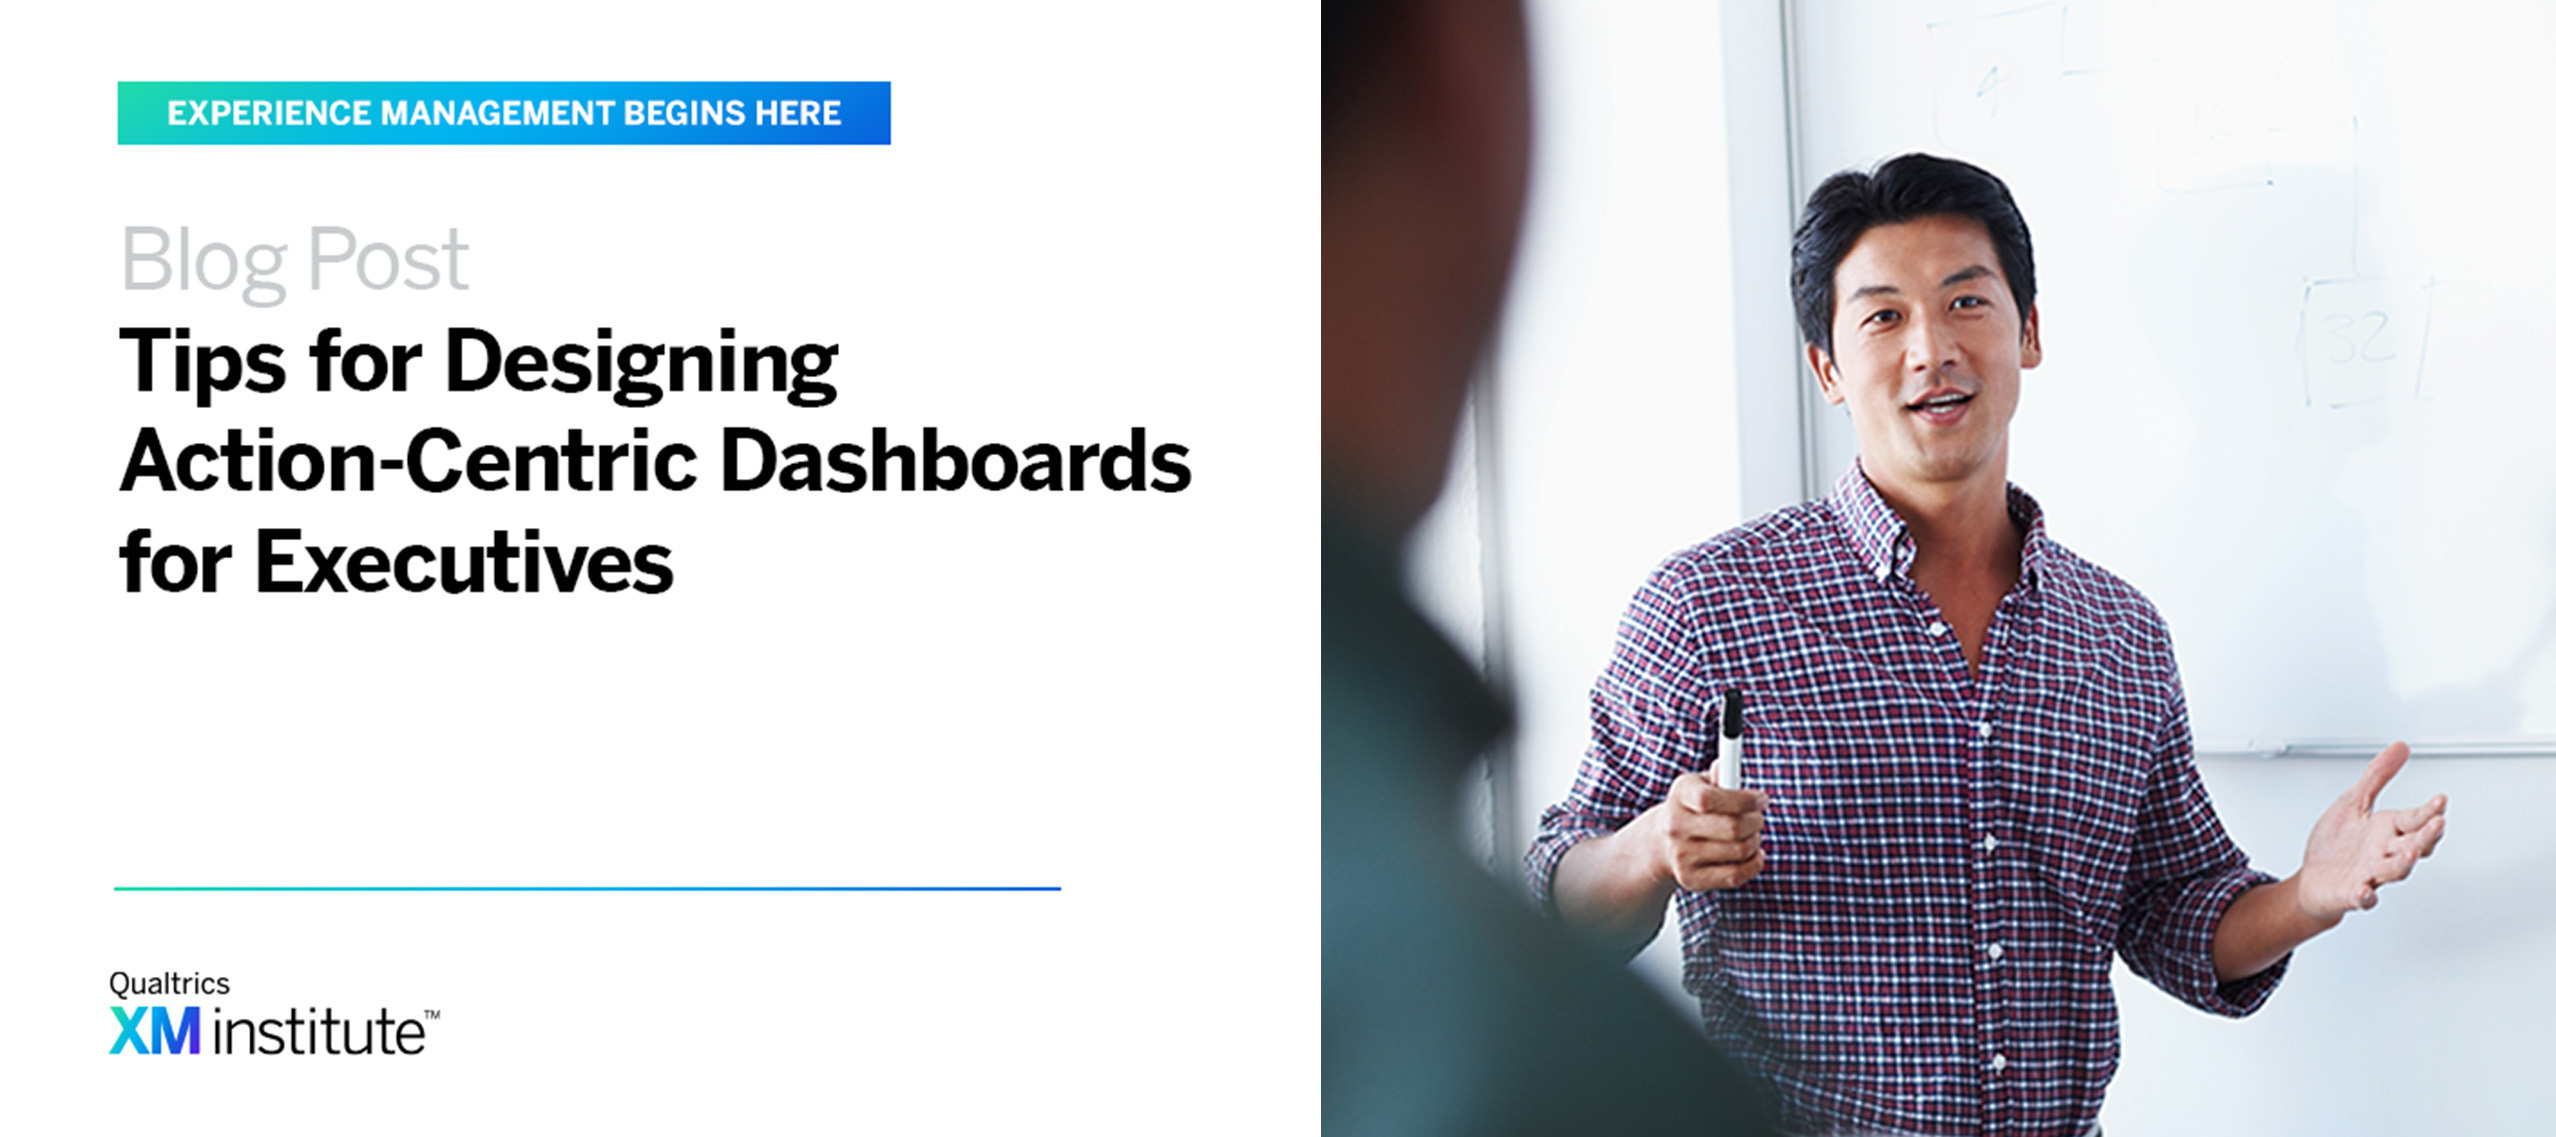 Tips for Designing Action-Centric Dashboards for Executives